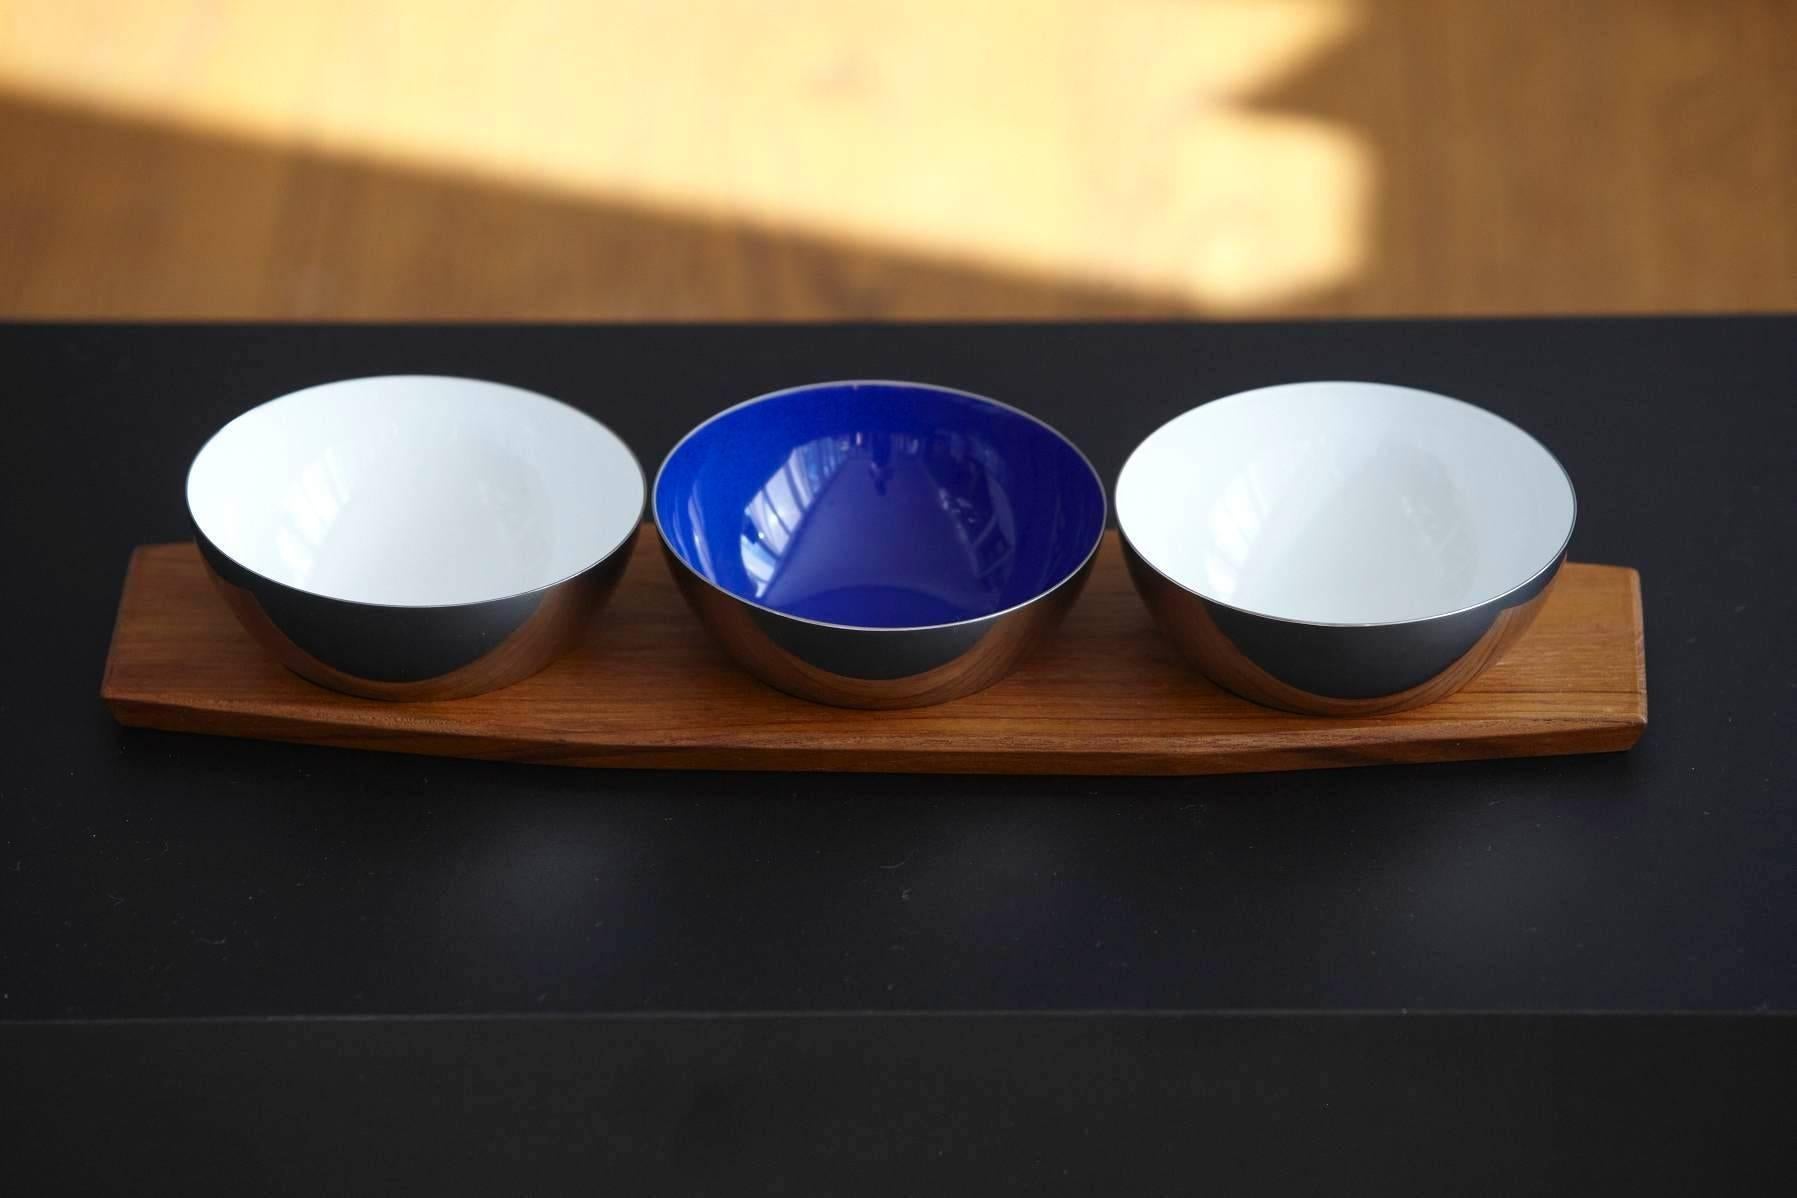 Beautiful set of three Cathrineholm of Norway silver buffed stainless steel of highest quality and porcelain enamel bowls in white and cobalt blue on a teak tray.
Designed by Grete and Arne Korsmo. 
Grand Prix X Triennale in Milan, 1956 and Gold